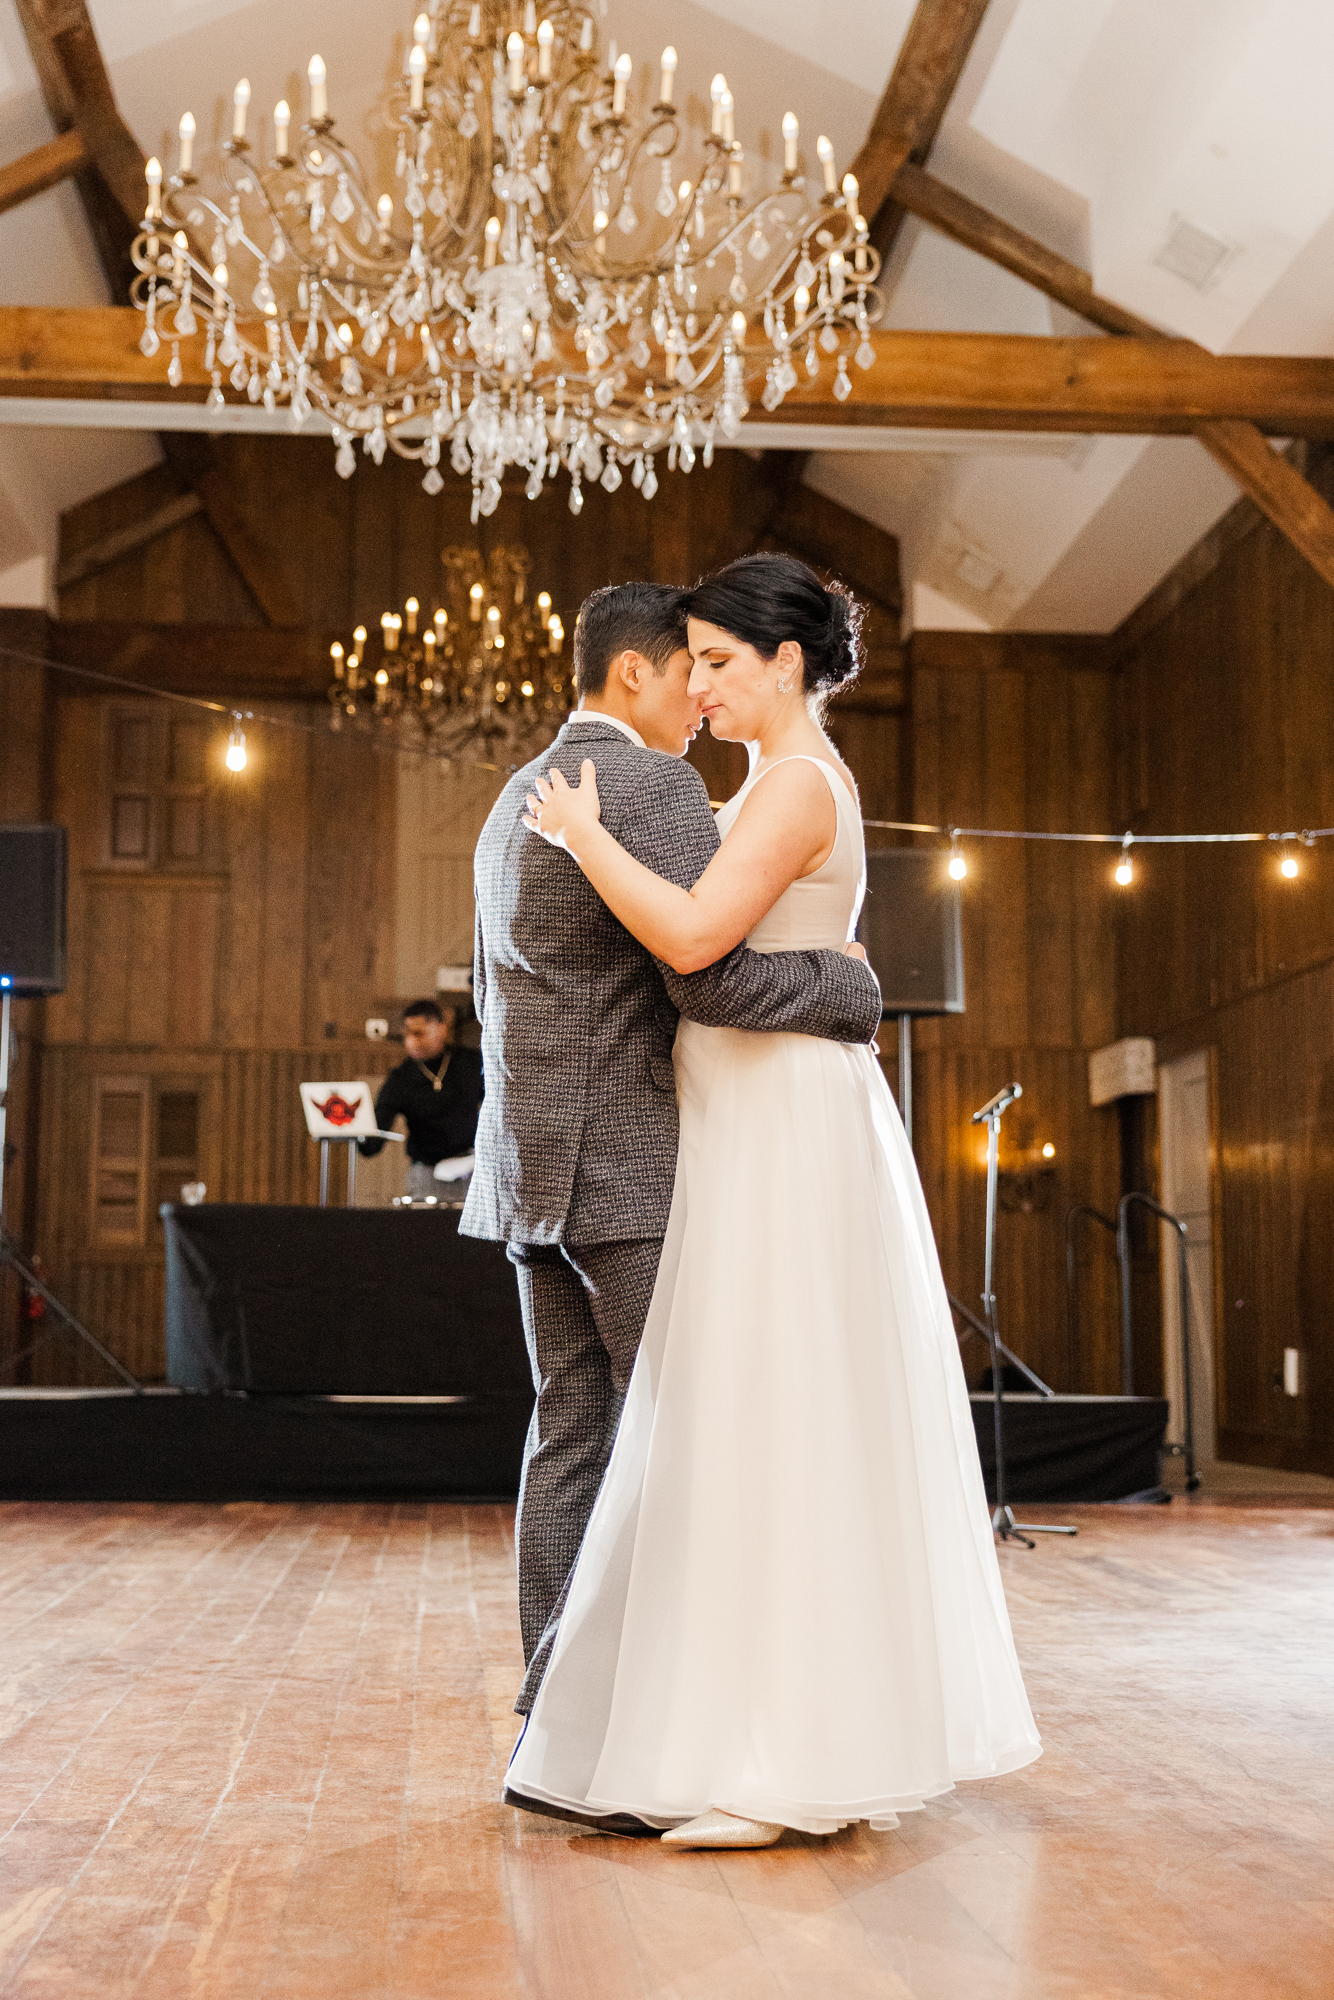 Touching Normandy Farm Wedding Photos in Wintery Blue Bell, PA